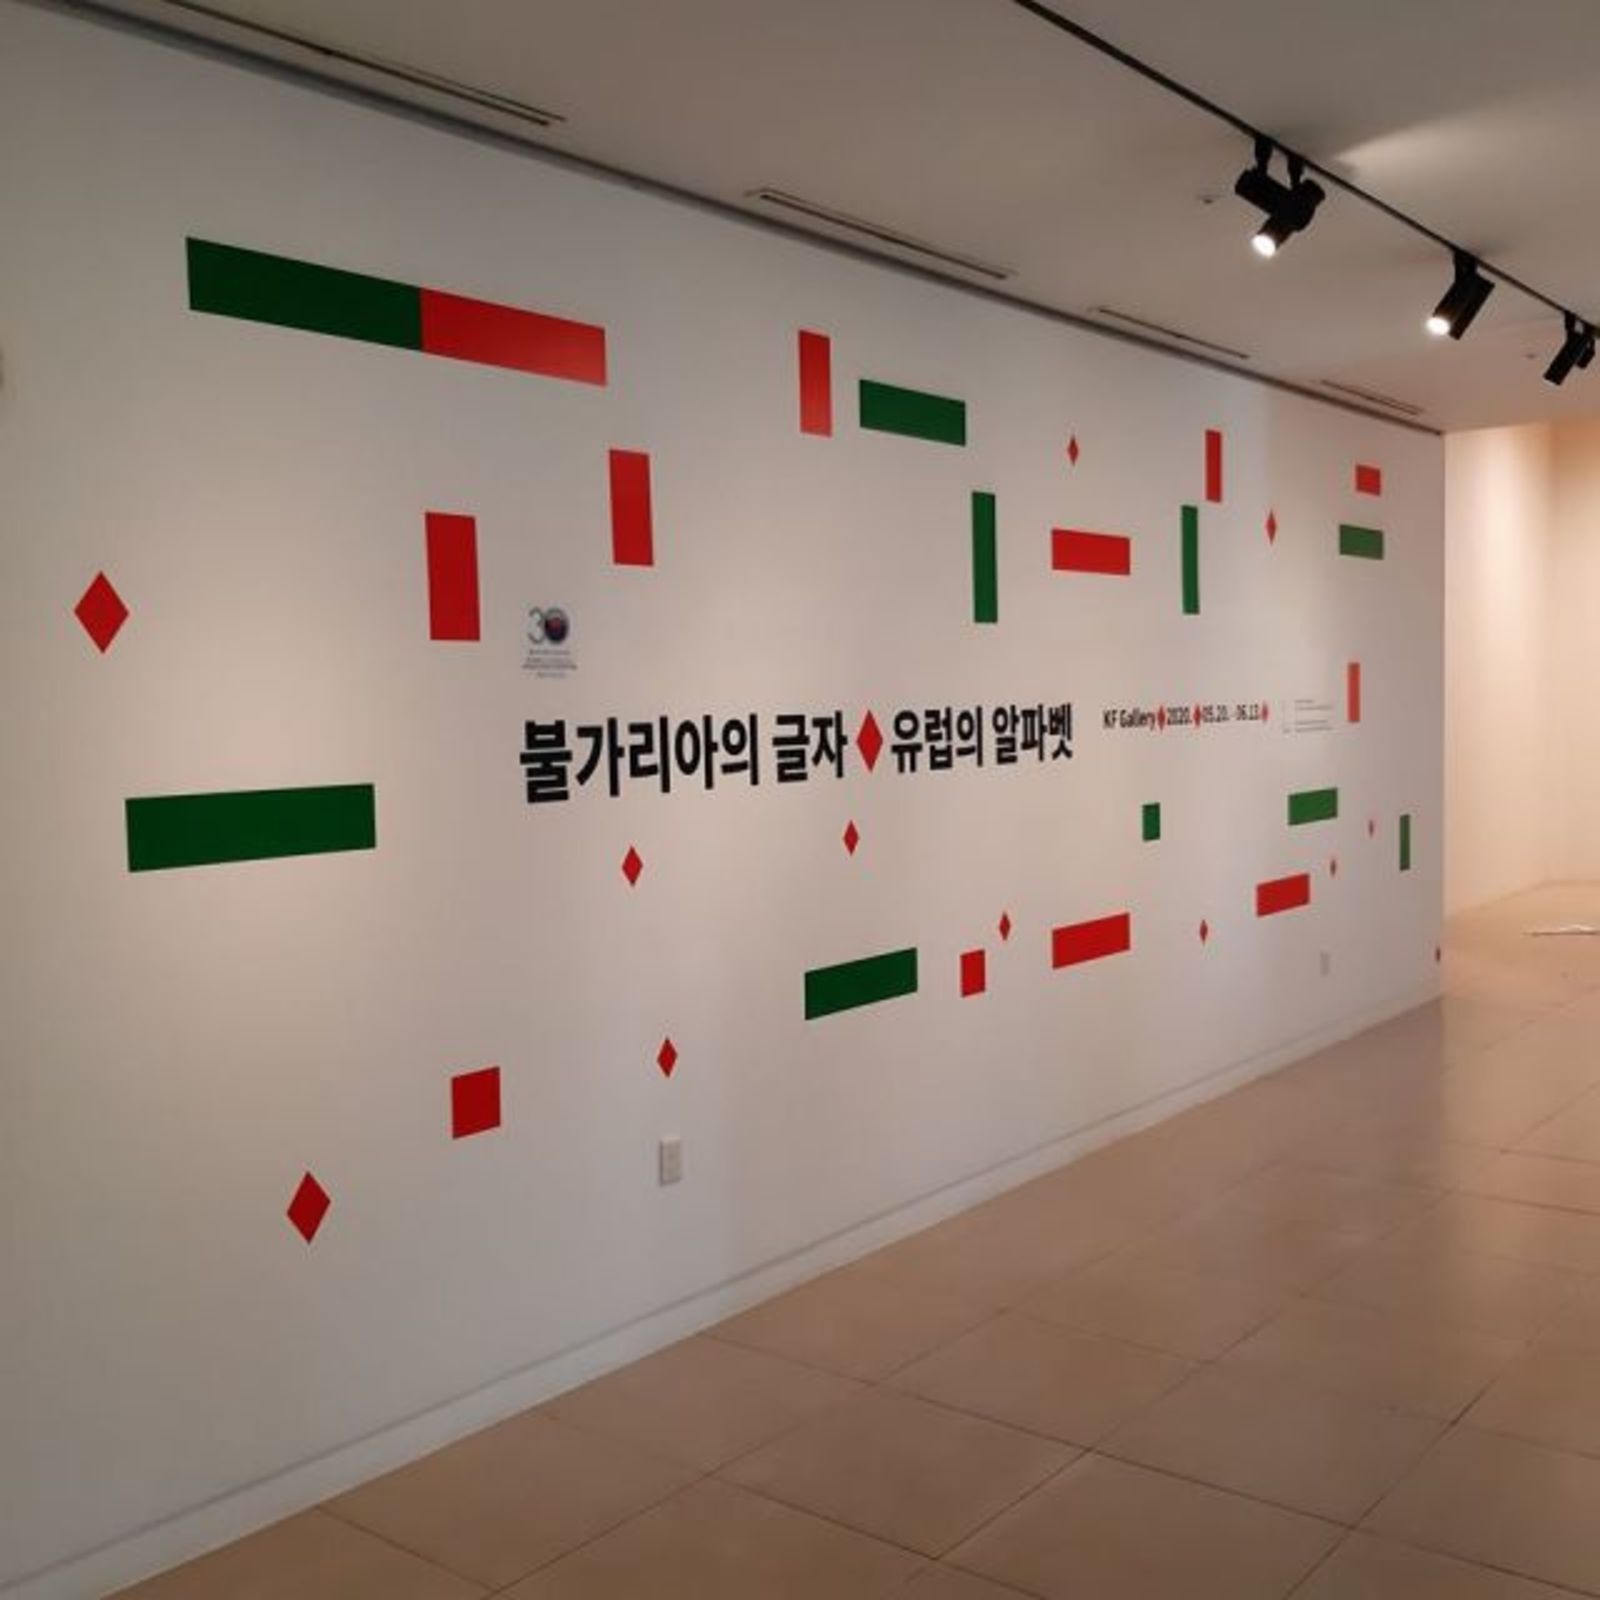 "The Letters of Bulgaria - Alphabet of Europe", presented in Seoul